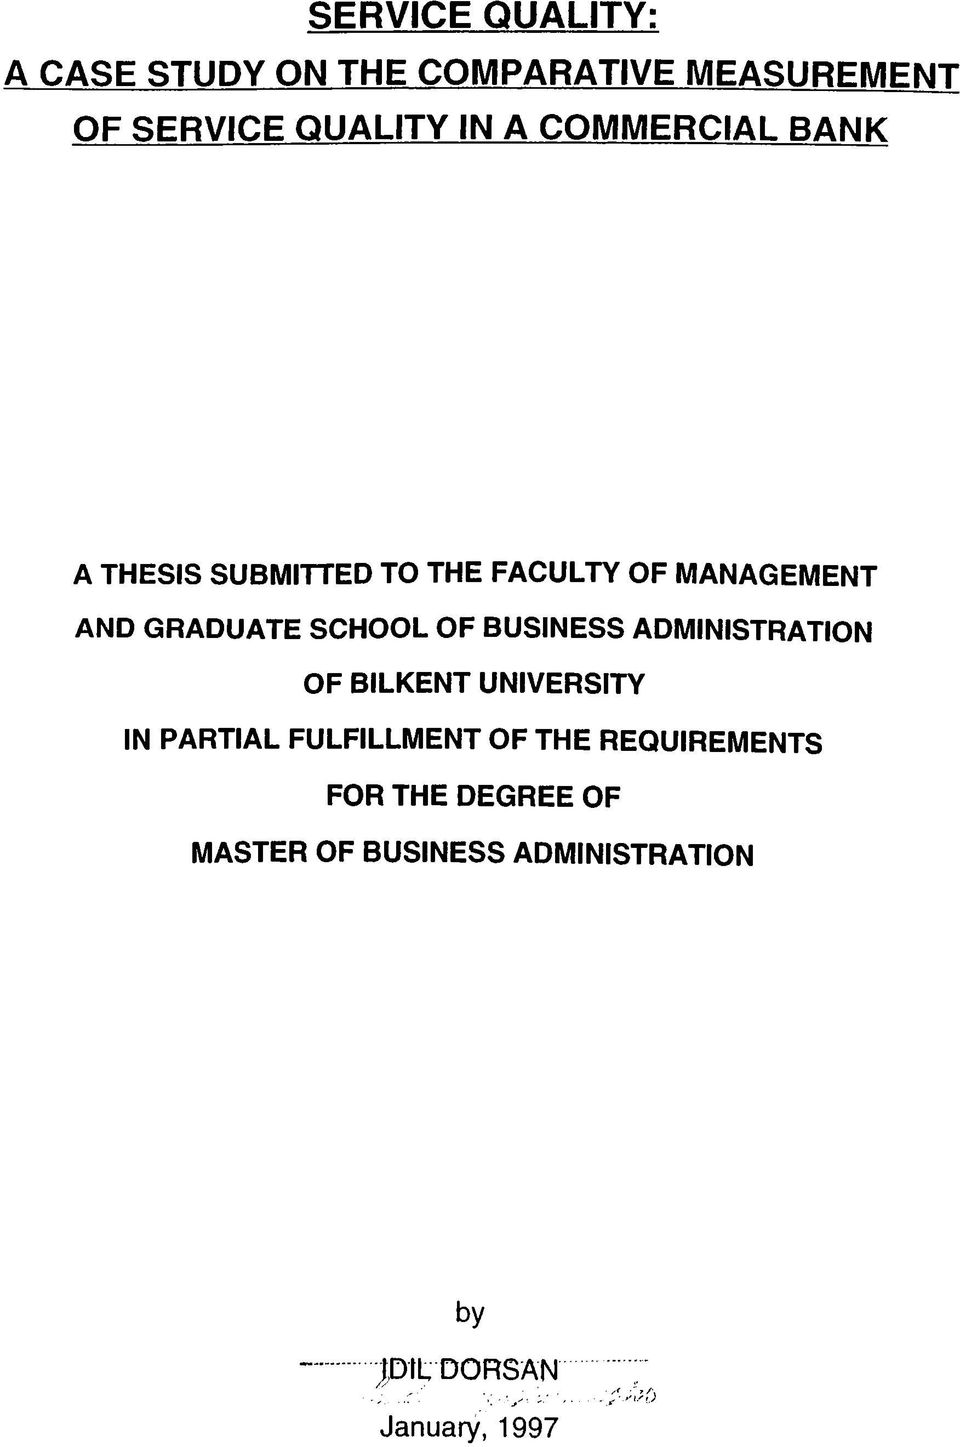 BUSINESS ADMINISTRATIN F BILKENT UNIVERSITY IN PARTIAL FULFILLMENT F THE